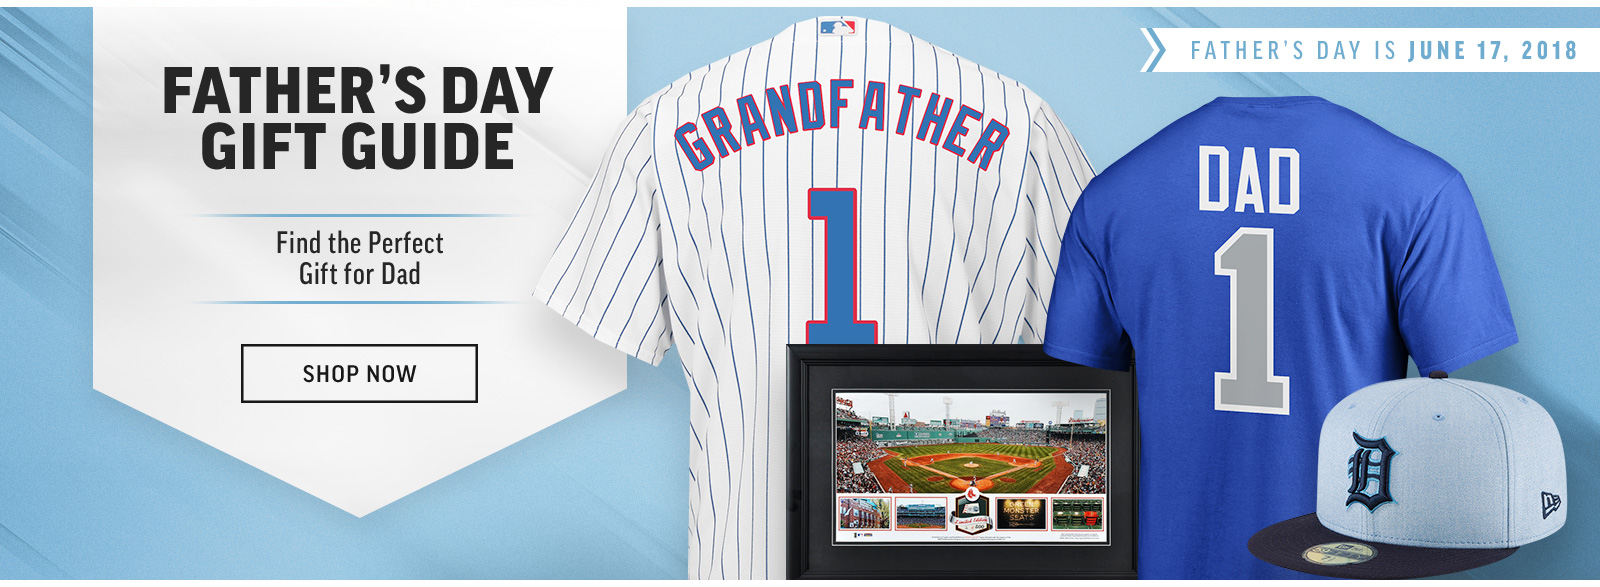 Shop Father's Day Gift Guide